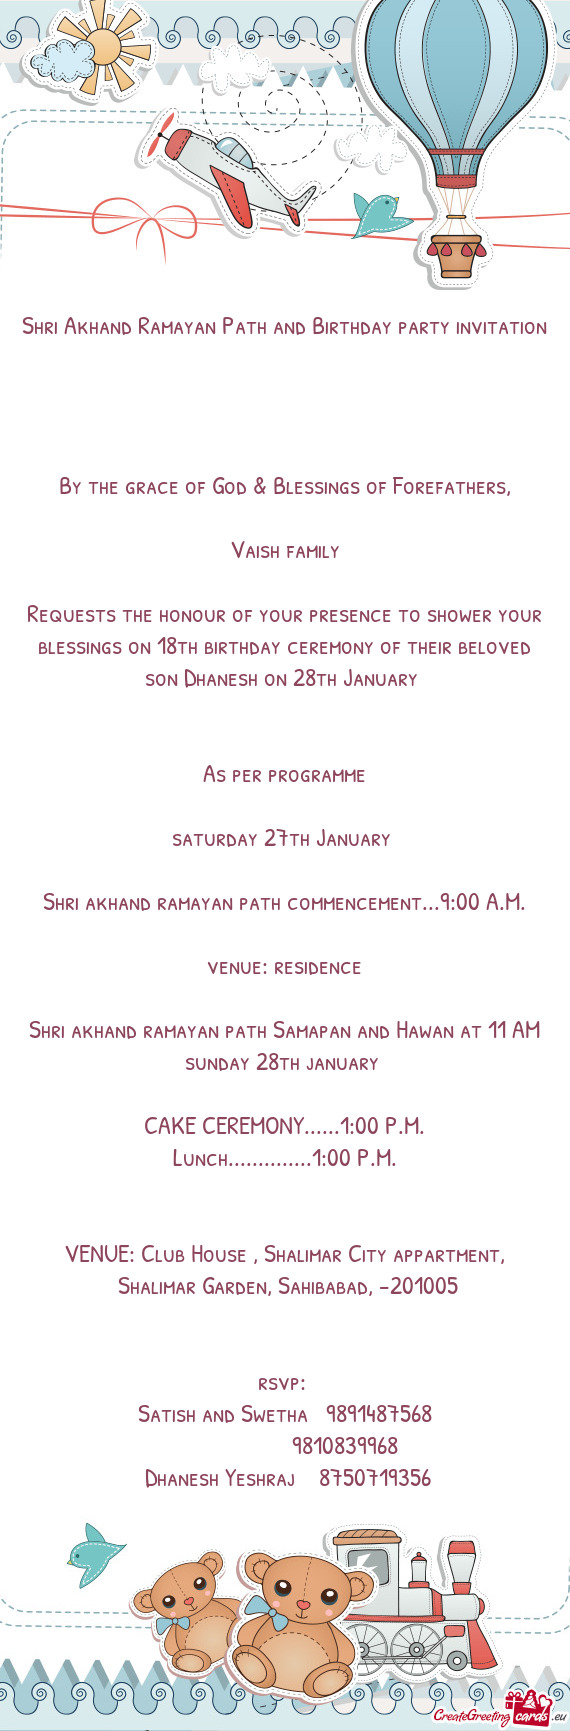 Requests the honour of your presence to shower your blessings on 18th birthday ceremony of their bel